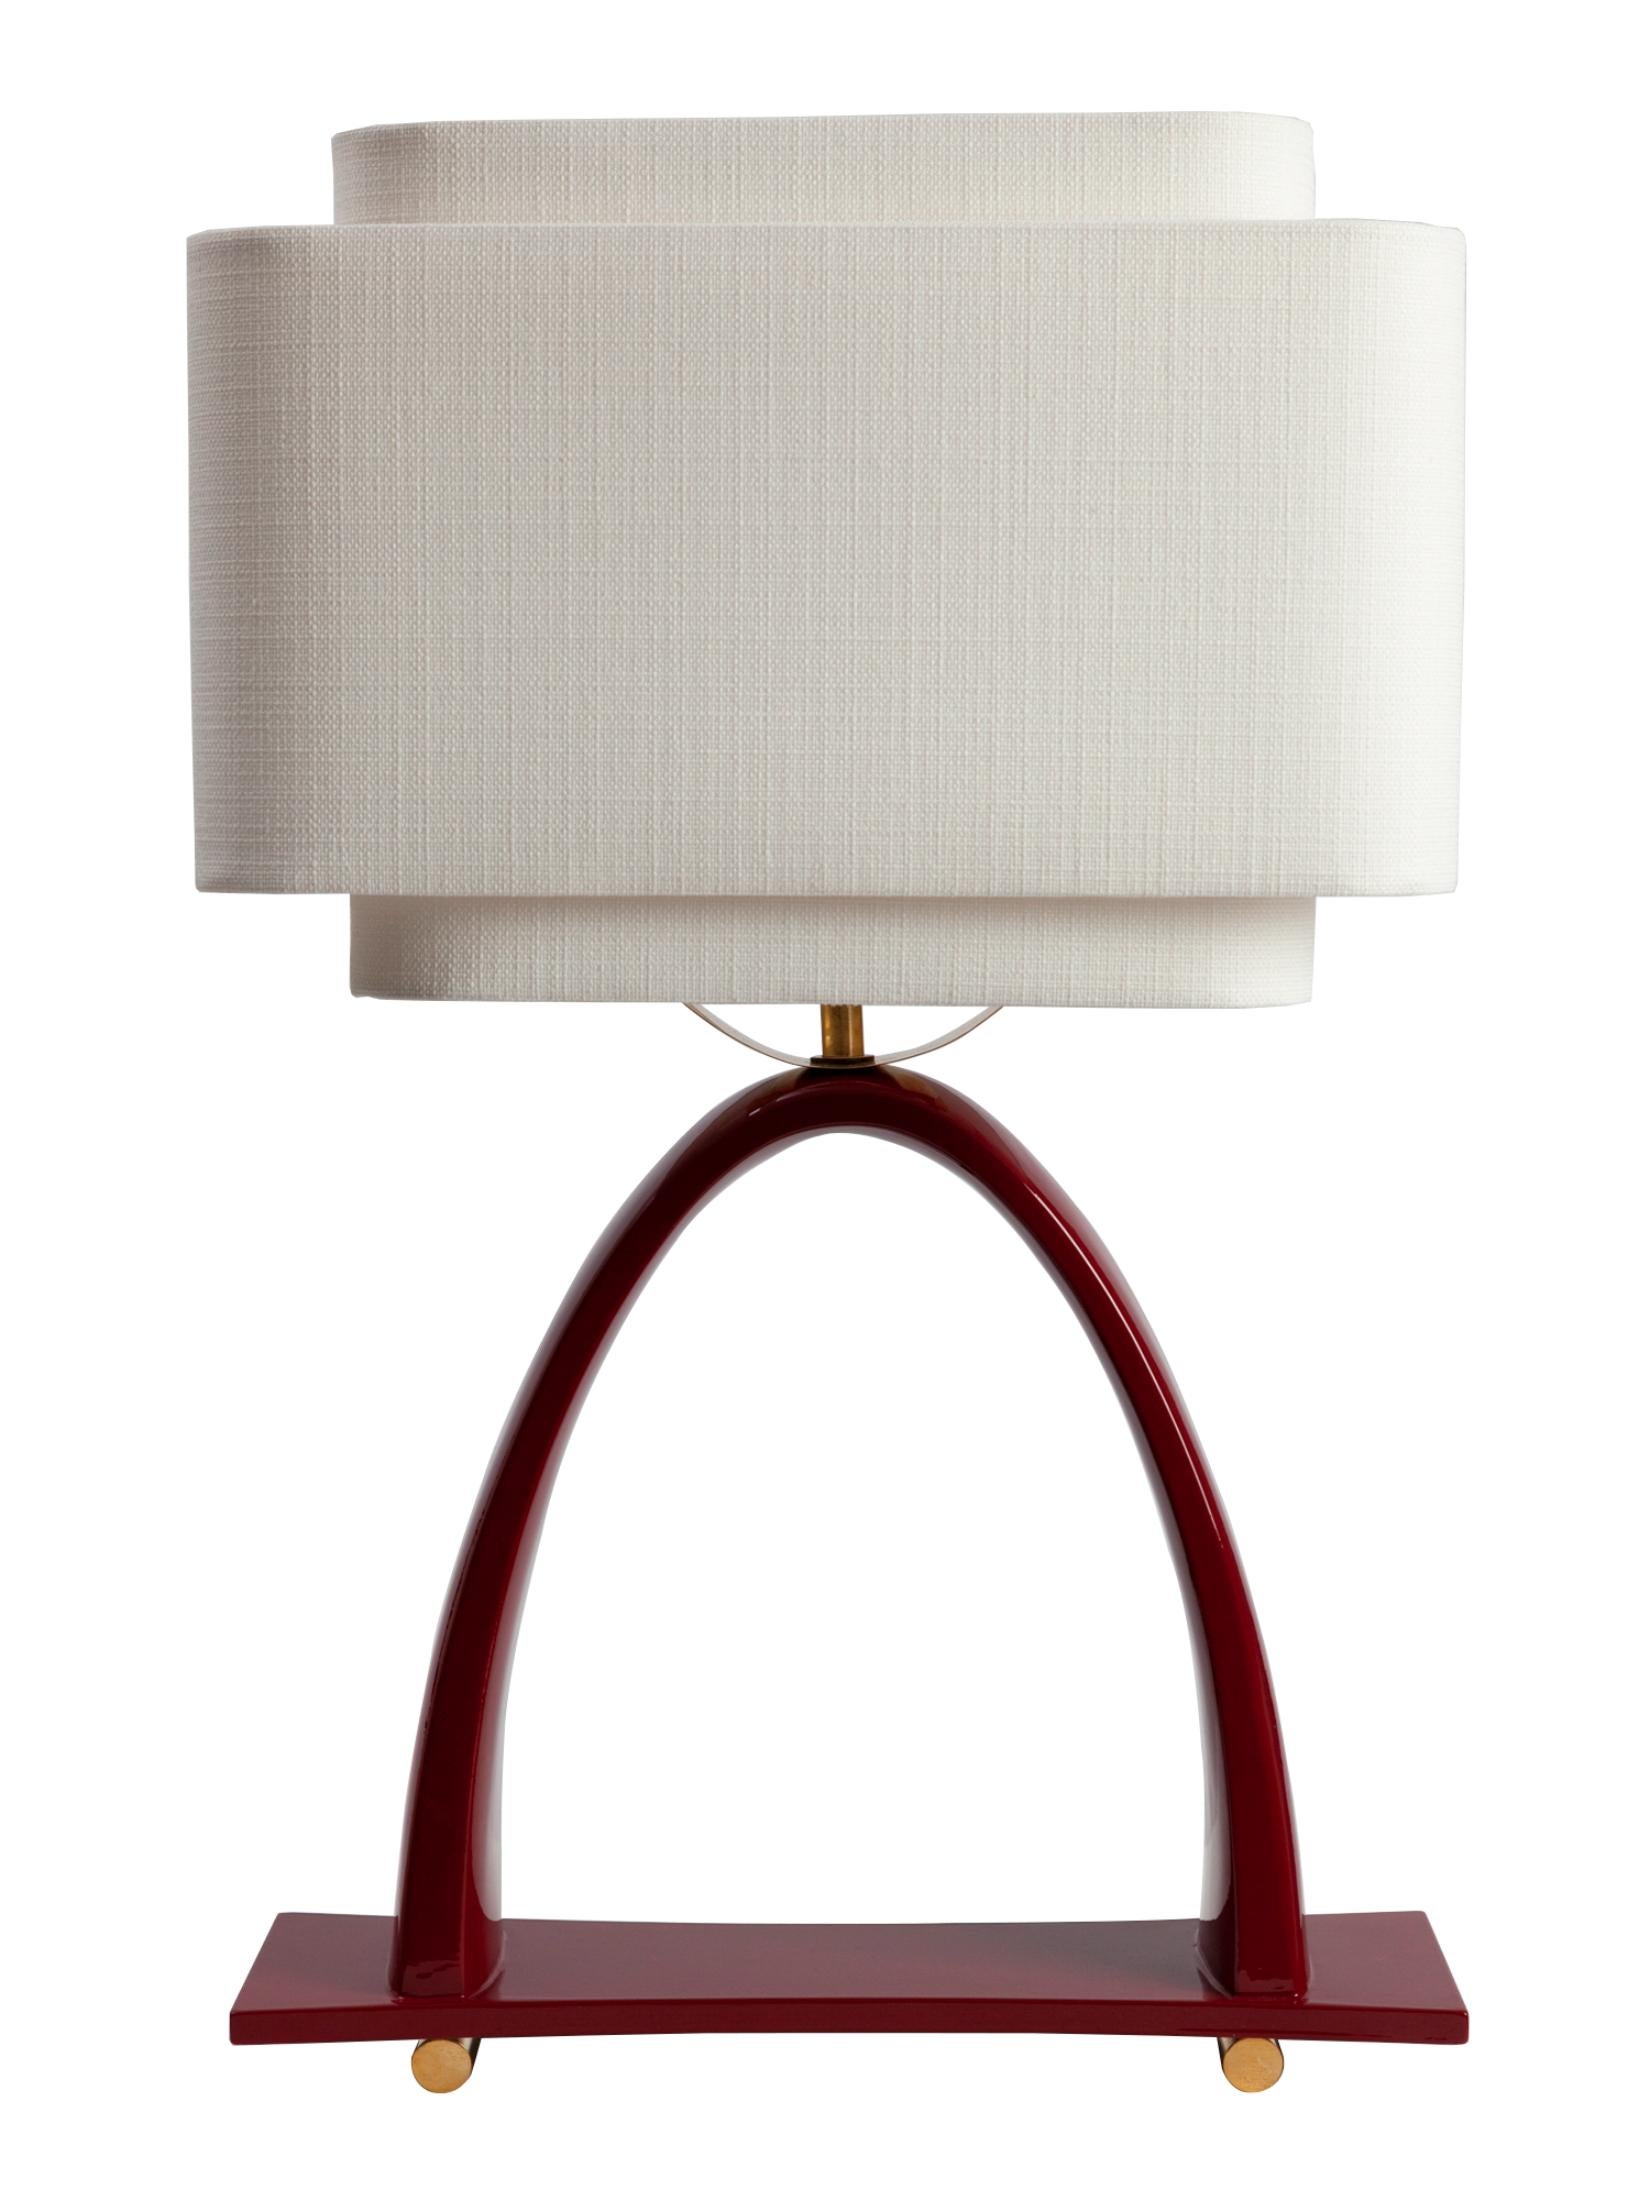 French Yoshiko Table Lamp by Kira Design For Sale